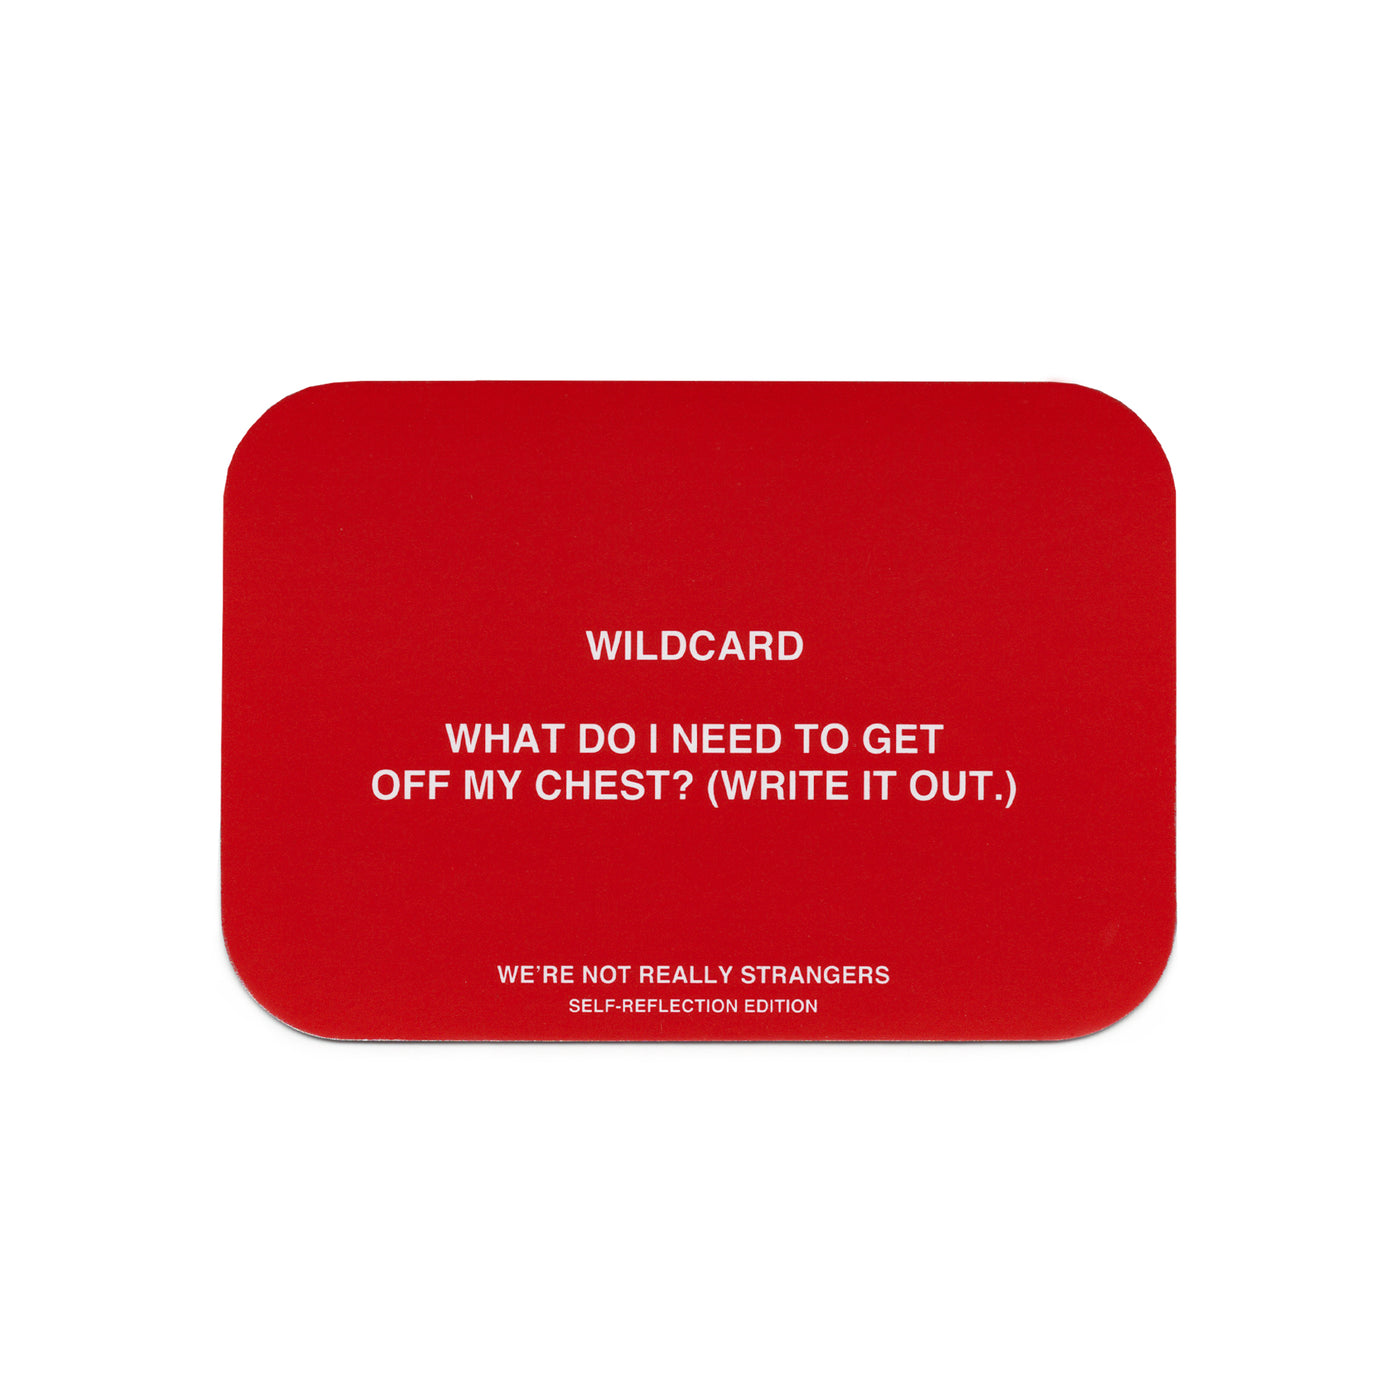 We're Not Really Strangers Self-Reflection Kit card reading "Wildcard - What do I need to get off my chest? (Write it out.)"